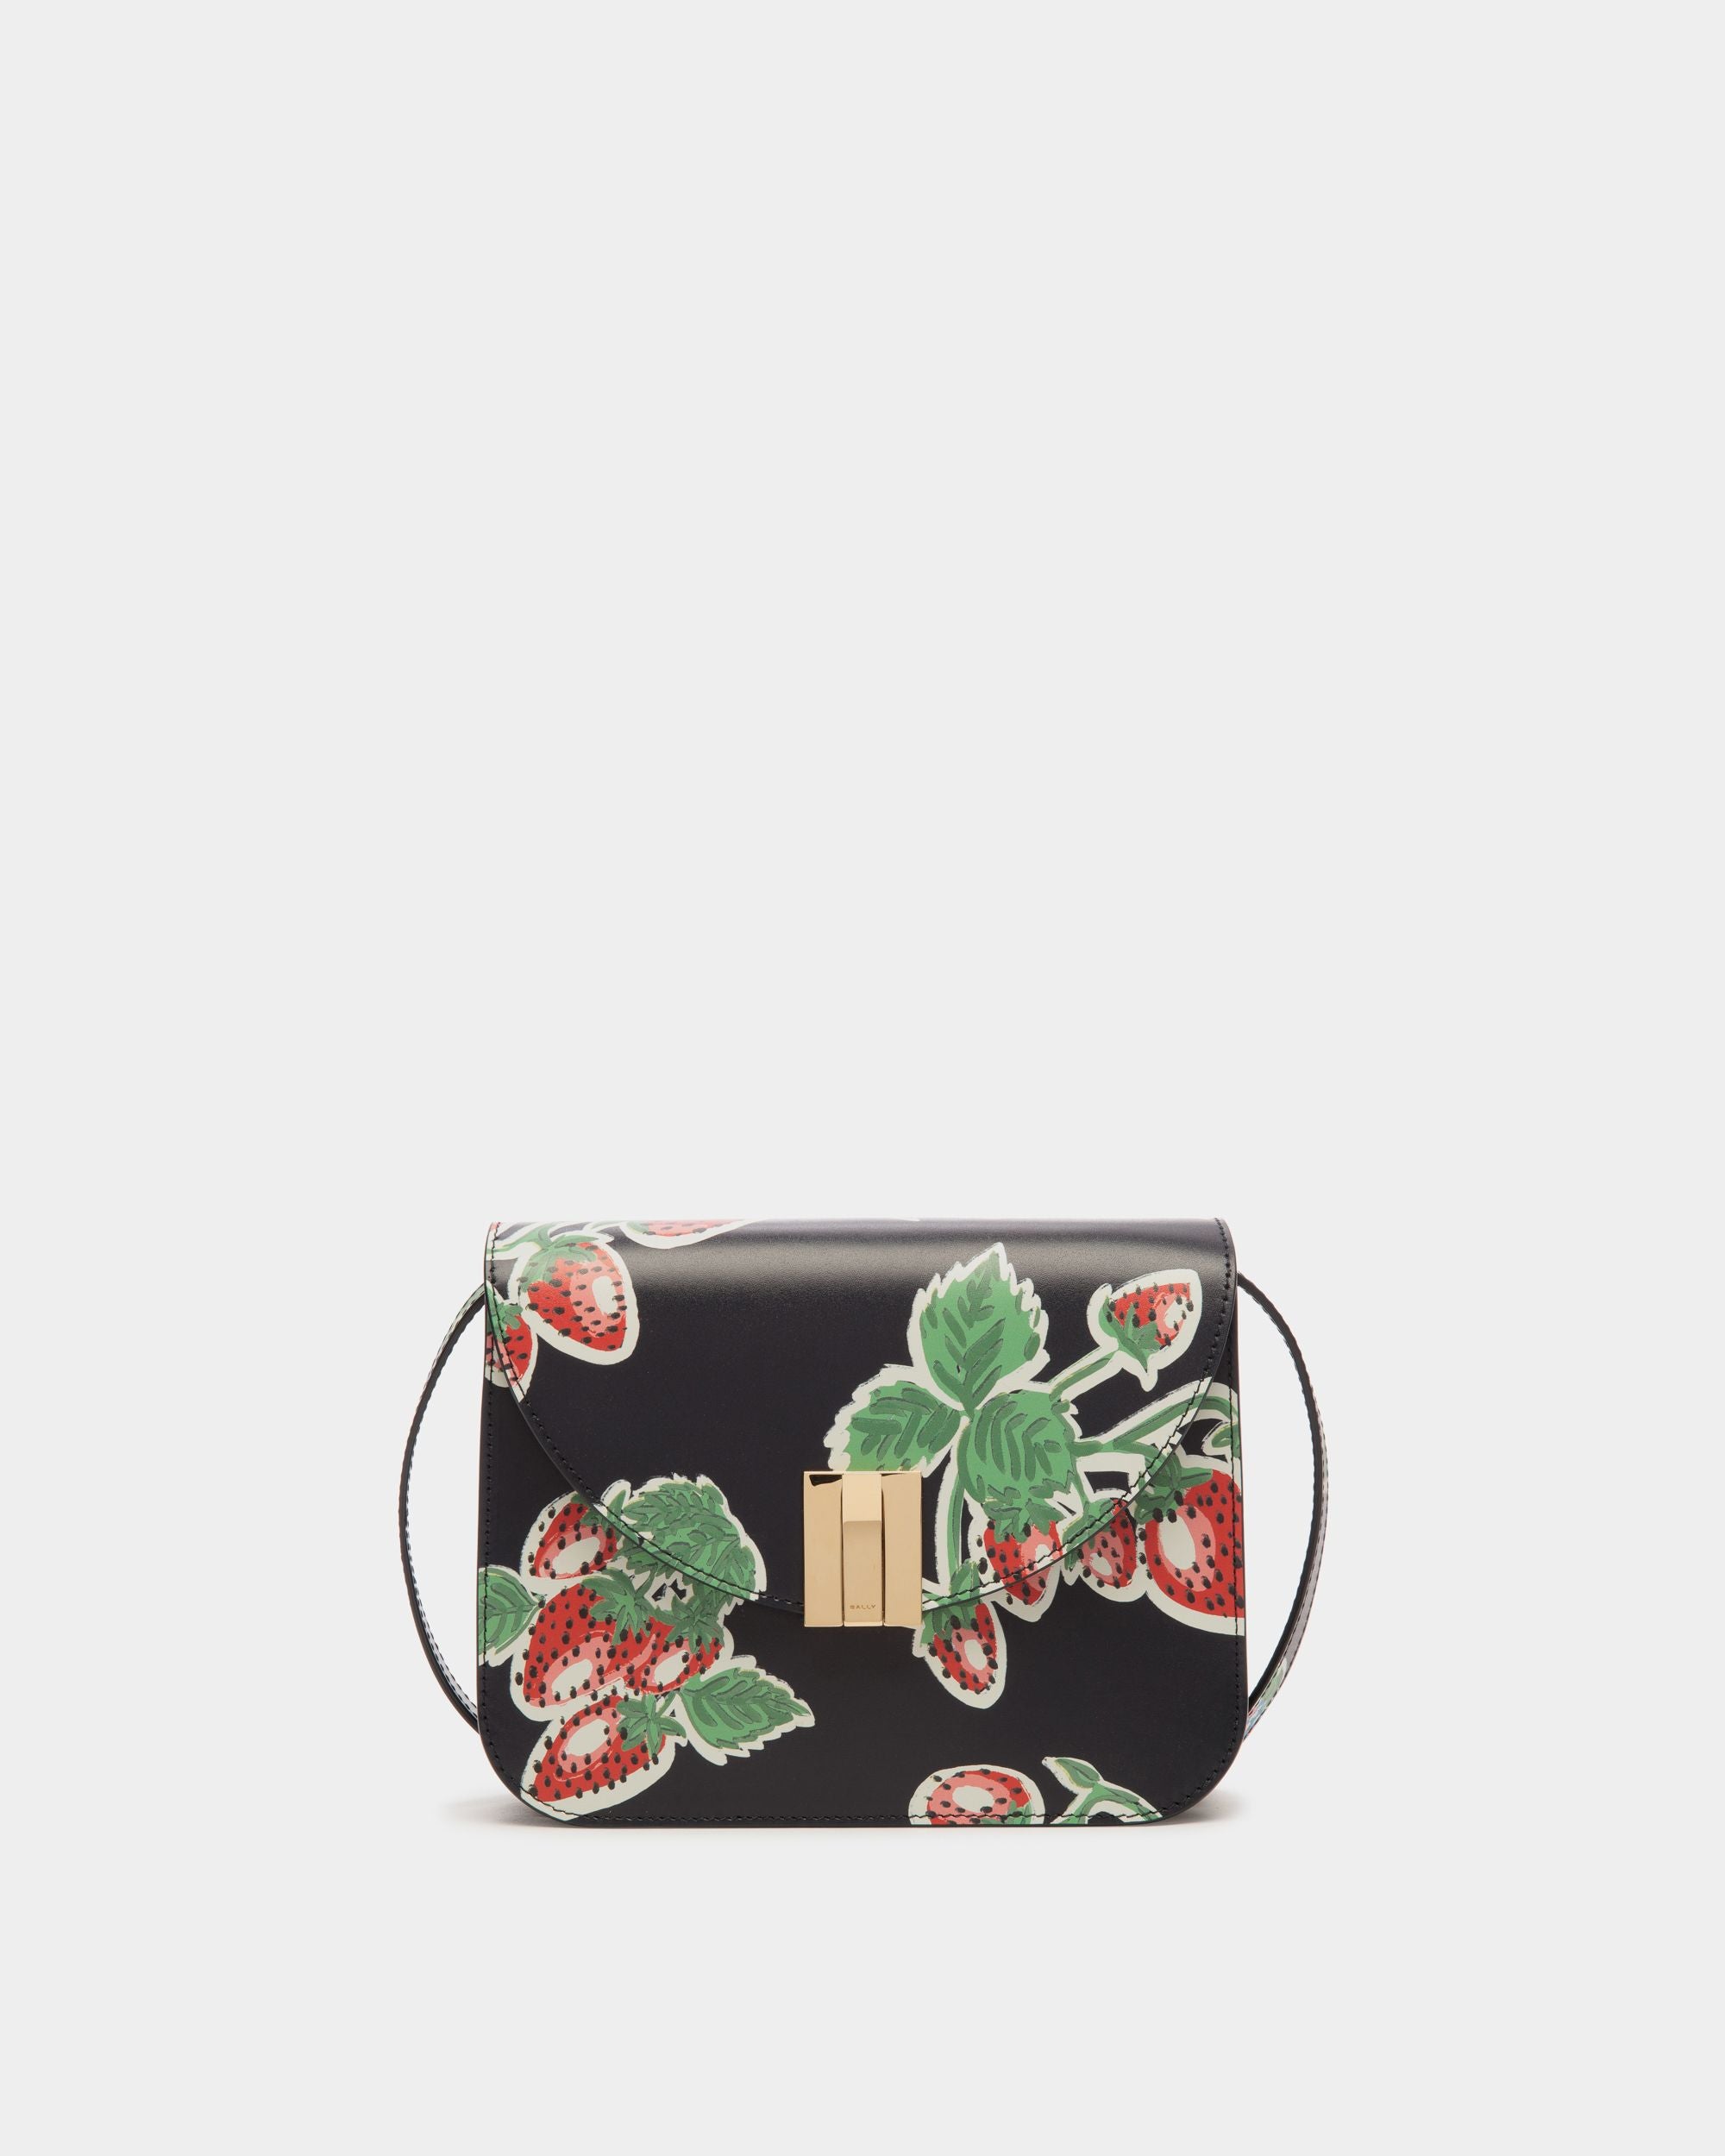 Women's Ollam Crossbody Bag in Strawberry Print Leather | Bally | Still Life Front